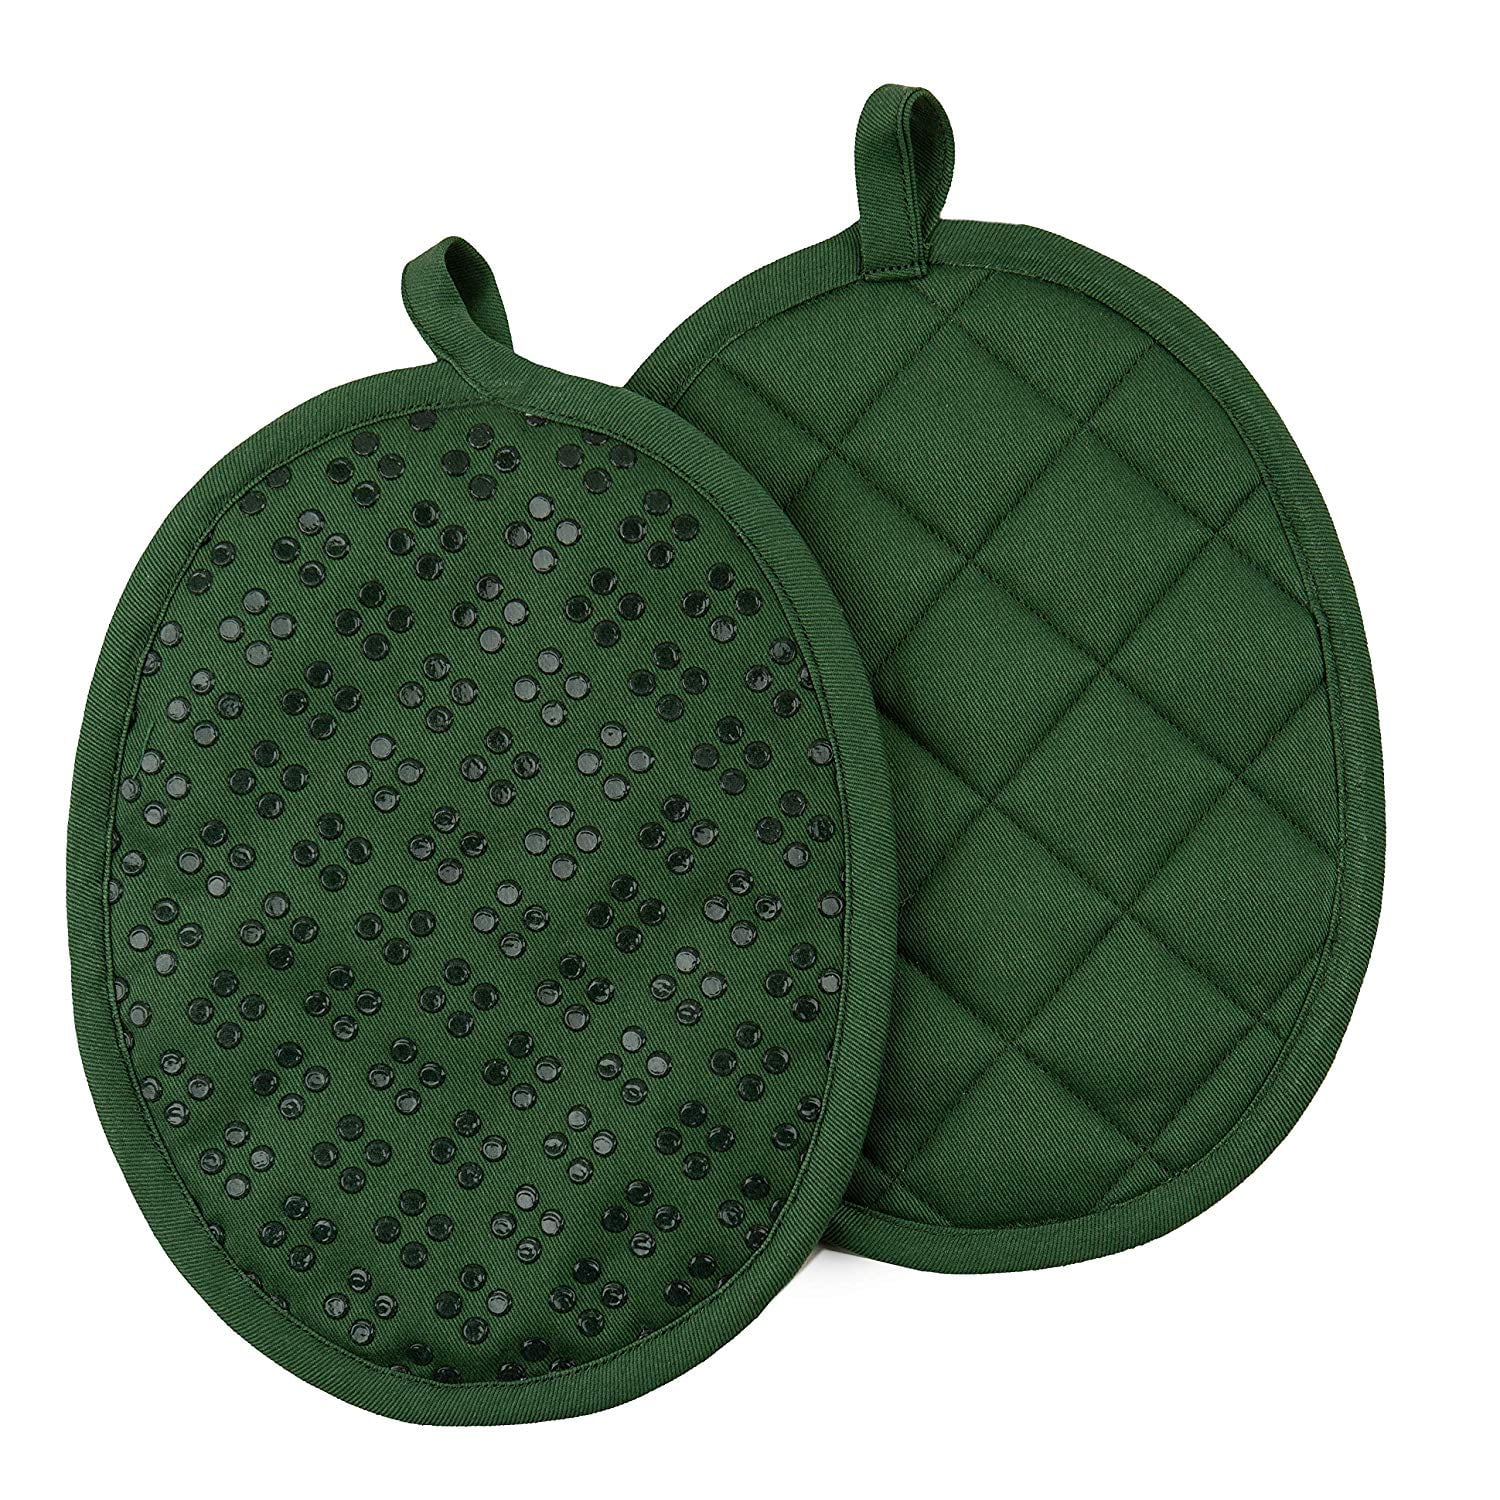 stargrass Tropical Leaves Oven Mitts and Pot Holders for Kitchen Heat  Resistant with Cotton Lining (2-Piece Set) - Green Oven Gloves and  Potholders